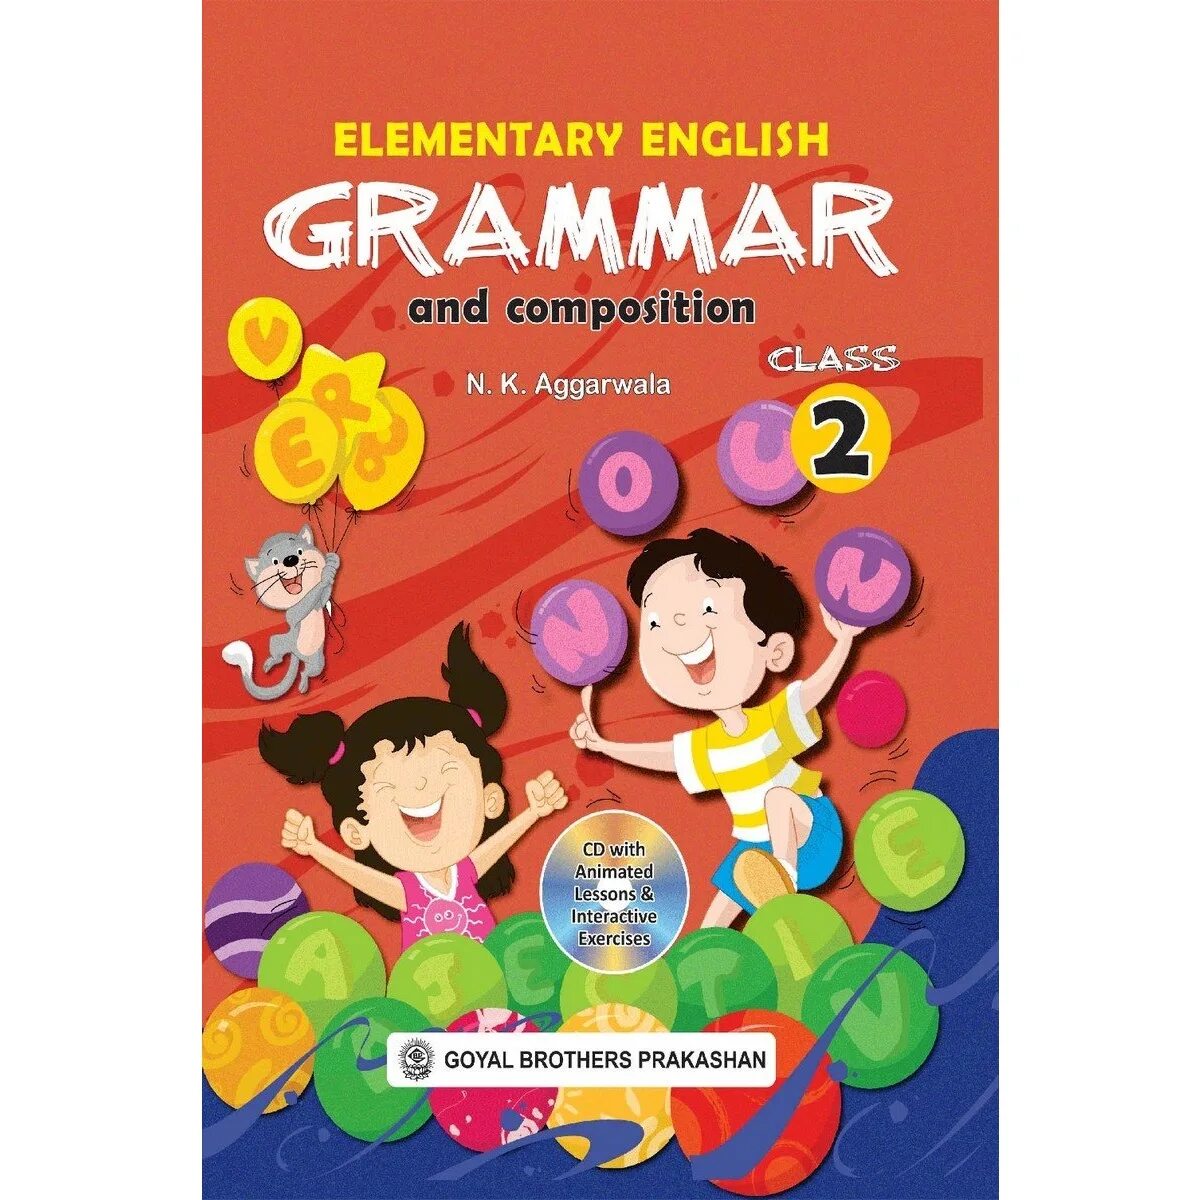 Elementary English Grammar and Composition. Popular Grammar and Composition. Grammar and Composition 3. Grammar book 2 класс. Elementary english